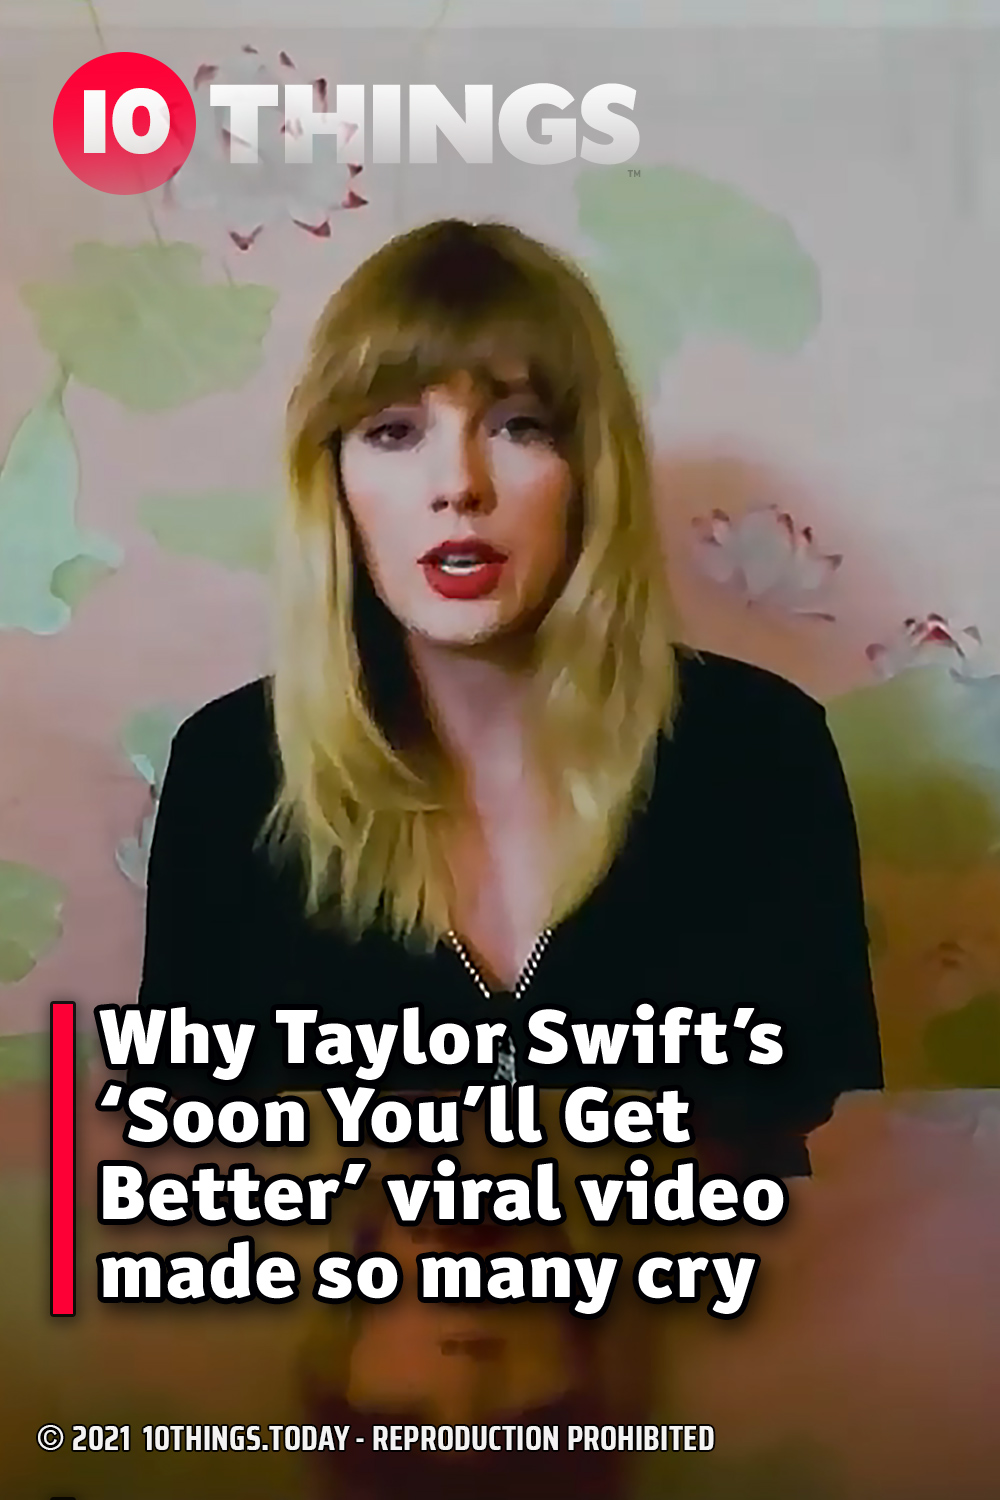 Why Taylor Swift’s ‘Soon You’ll Get Better’ viral video made so many cry